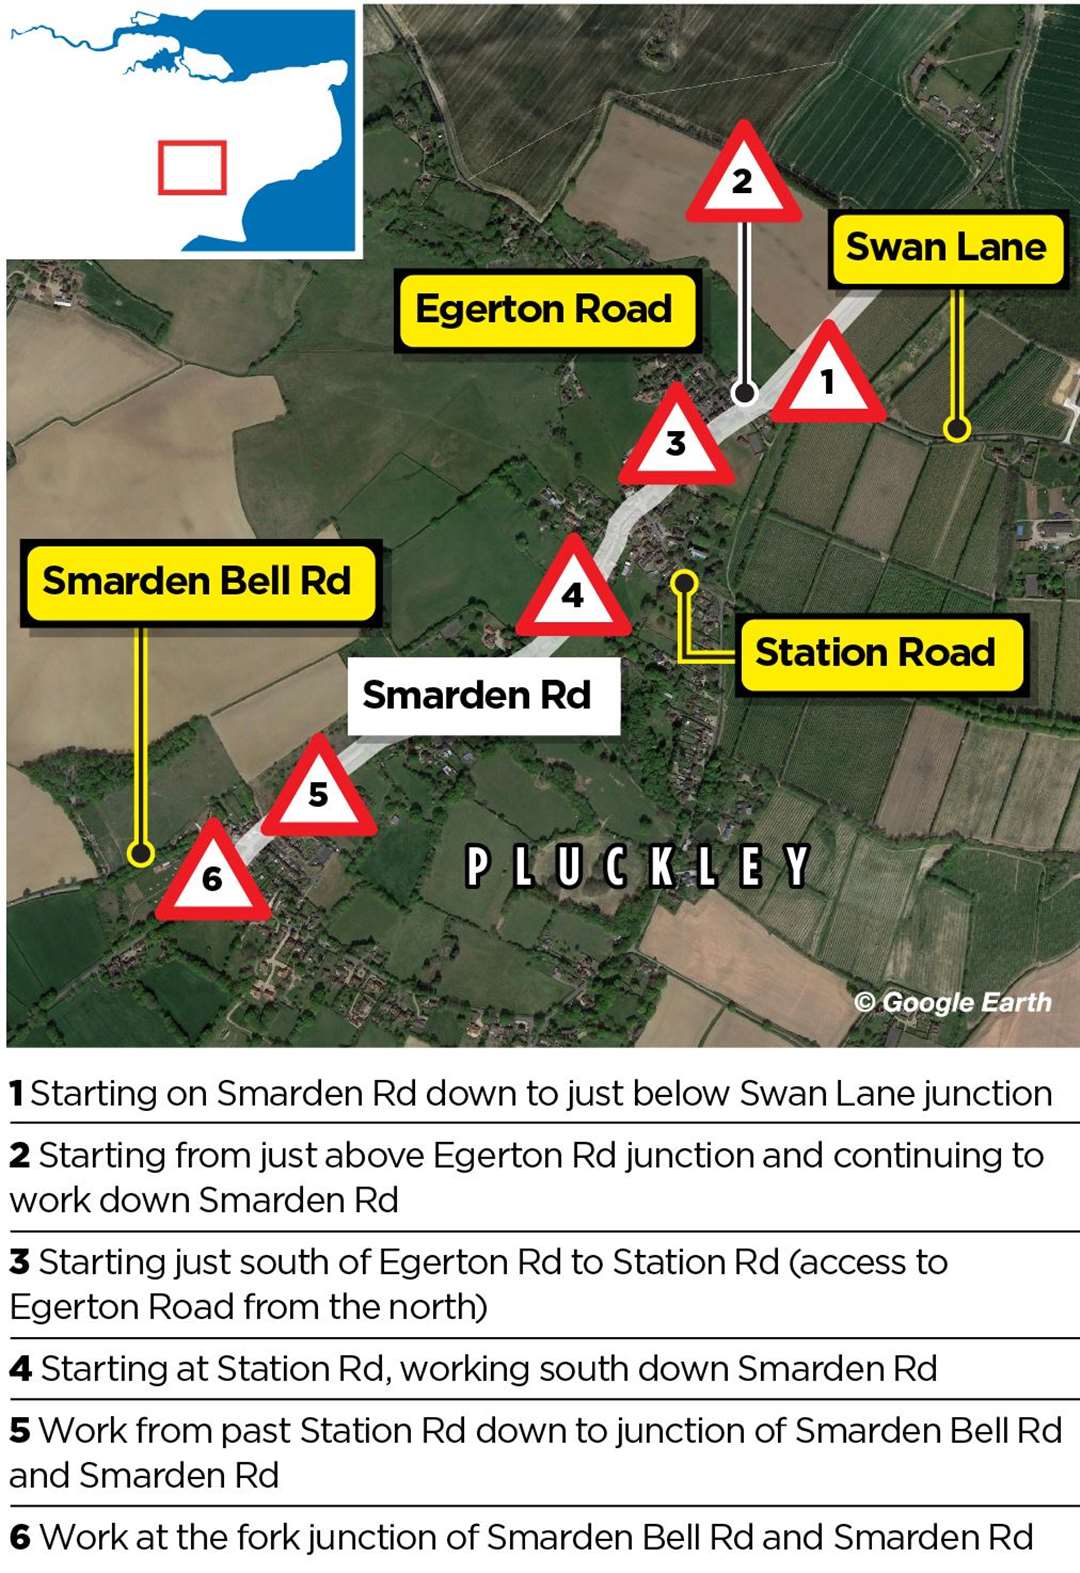 The six stages of work on Smarden Road